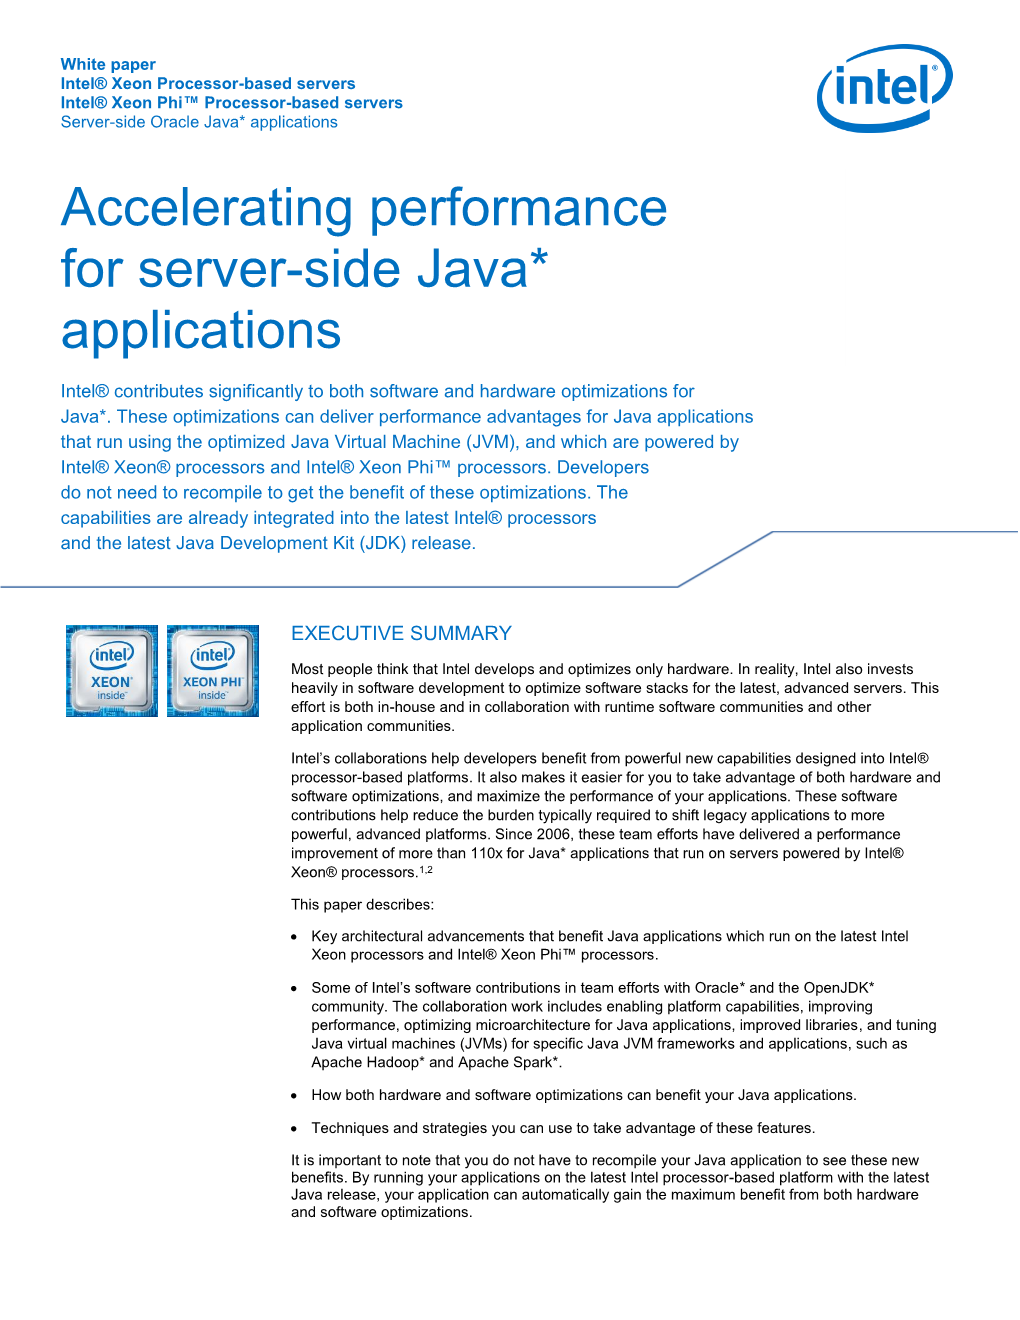 Accelerating Performance for Server-Side Java* Applications 2